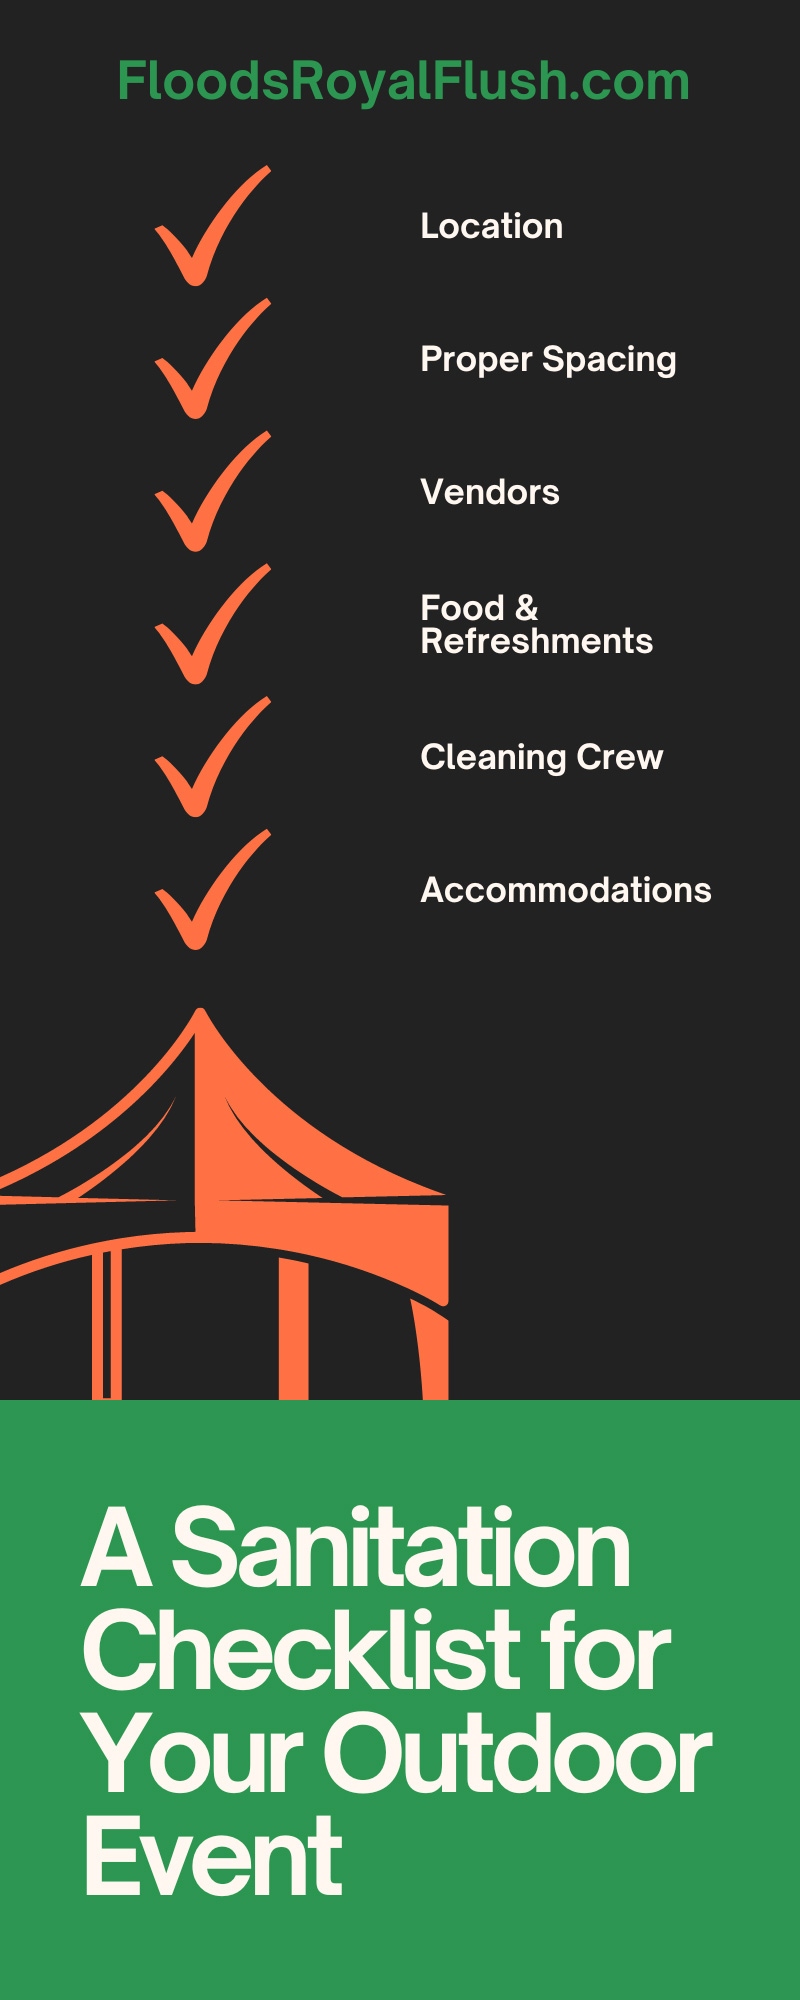 A Sanitation Checklist for Your Outdoor Event